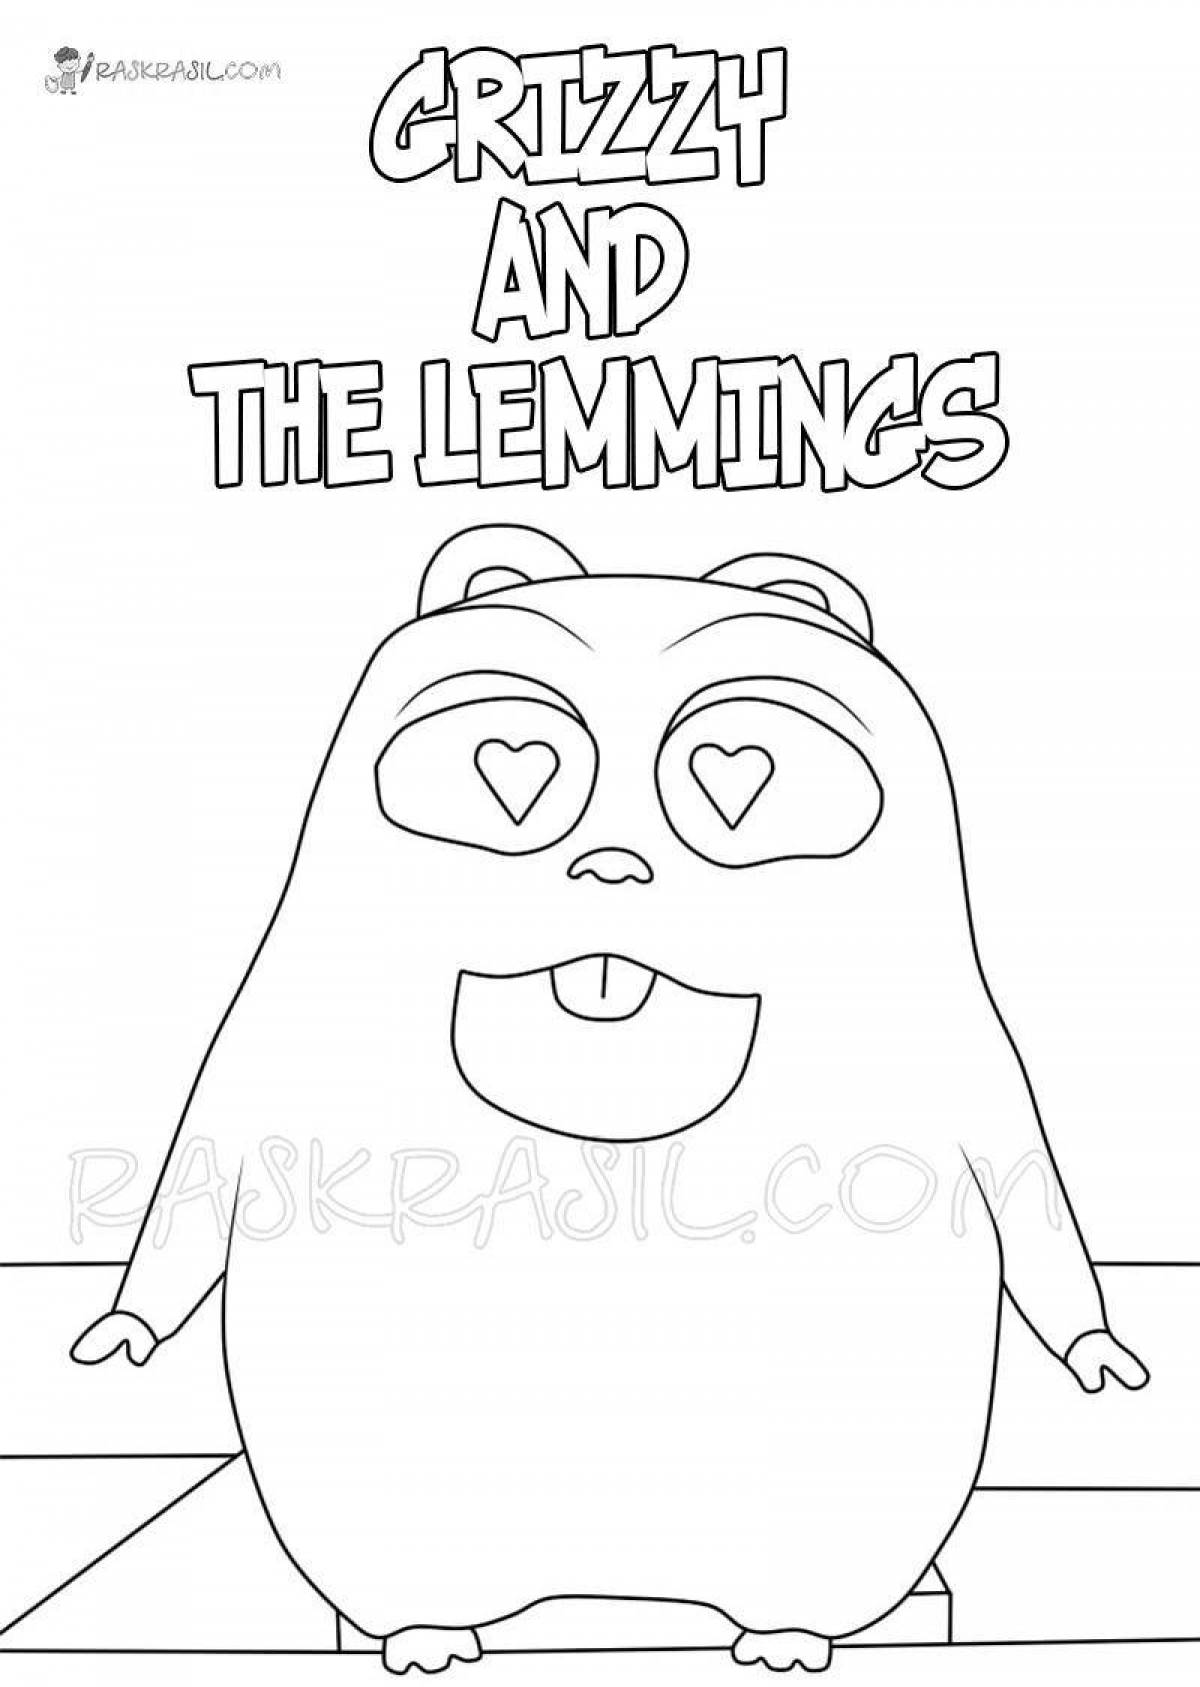 Exciting grizzly and lemming coloring pages